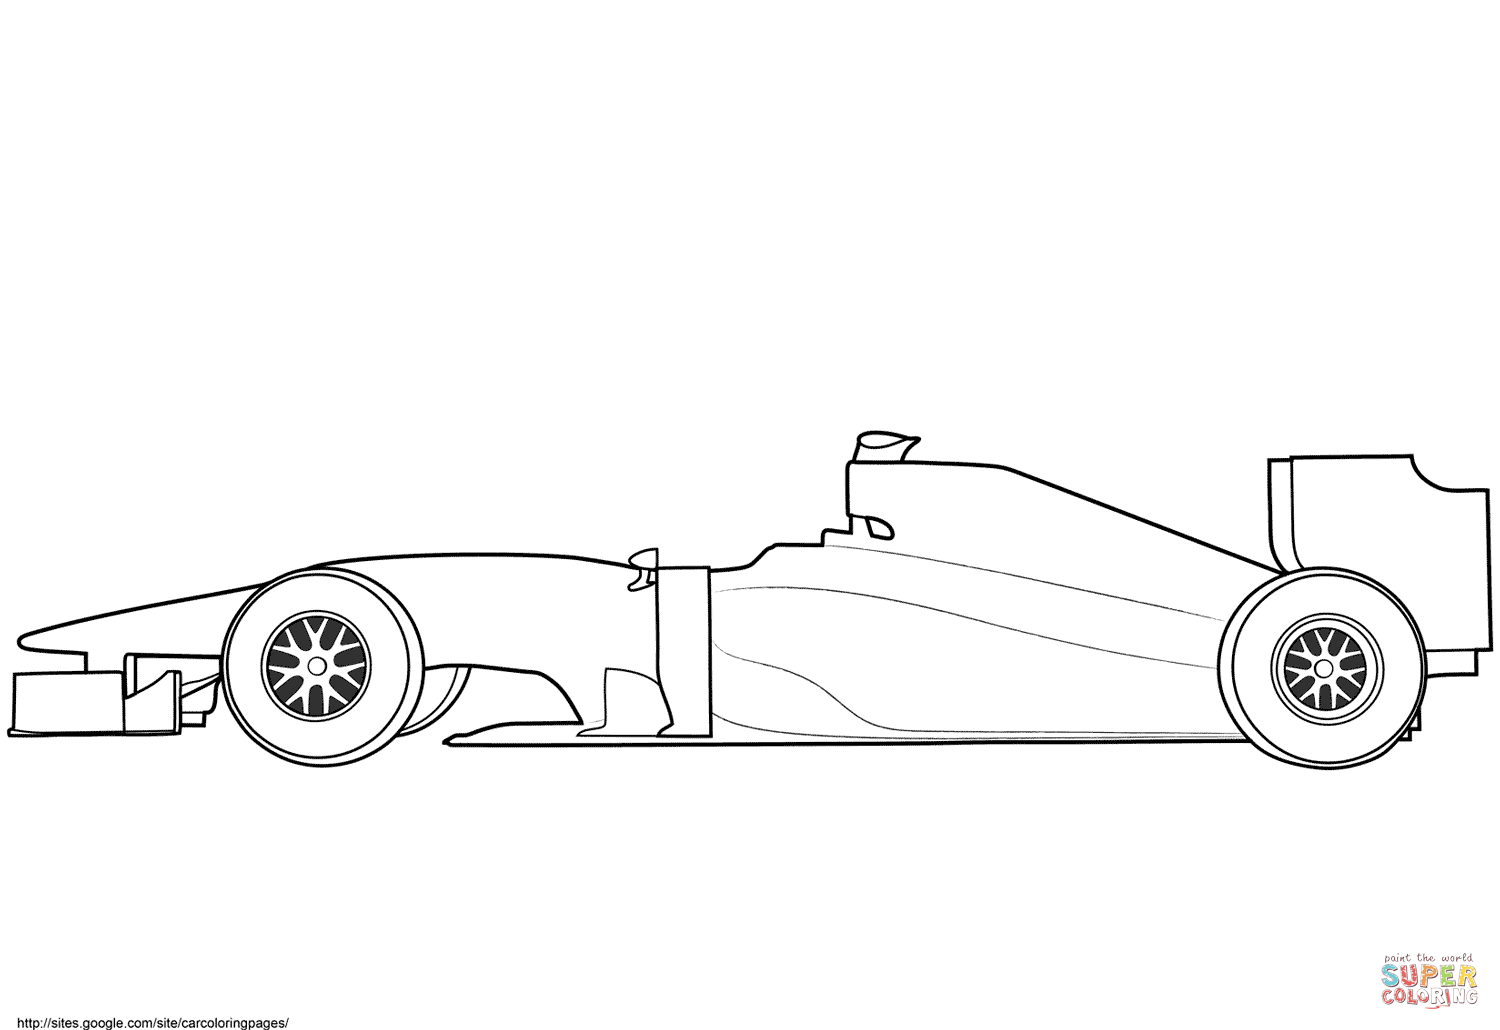 Blank Formula 1 Race Car Coloring Page | Free Printable Throughout Blank Race Car Templates